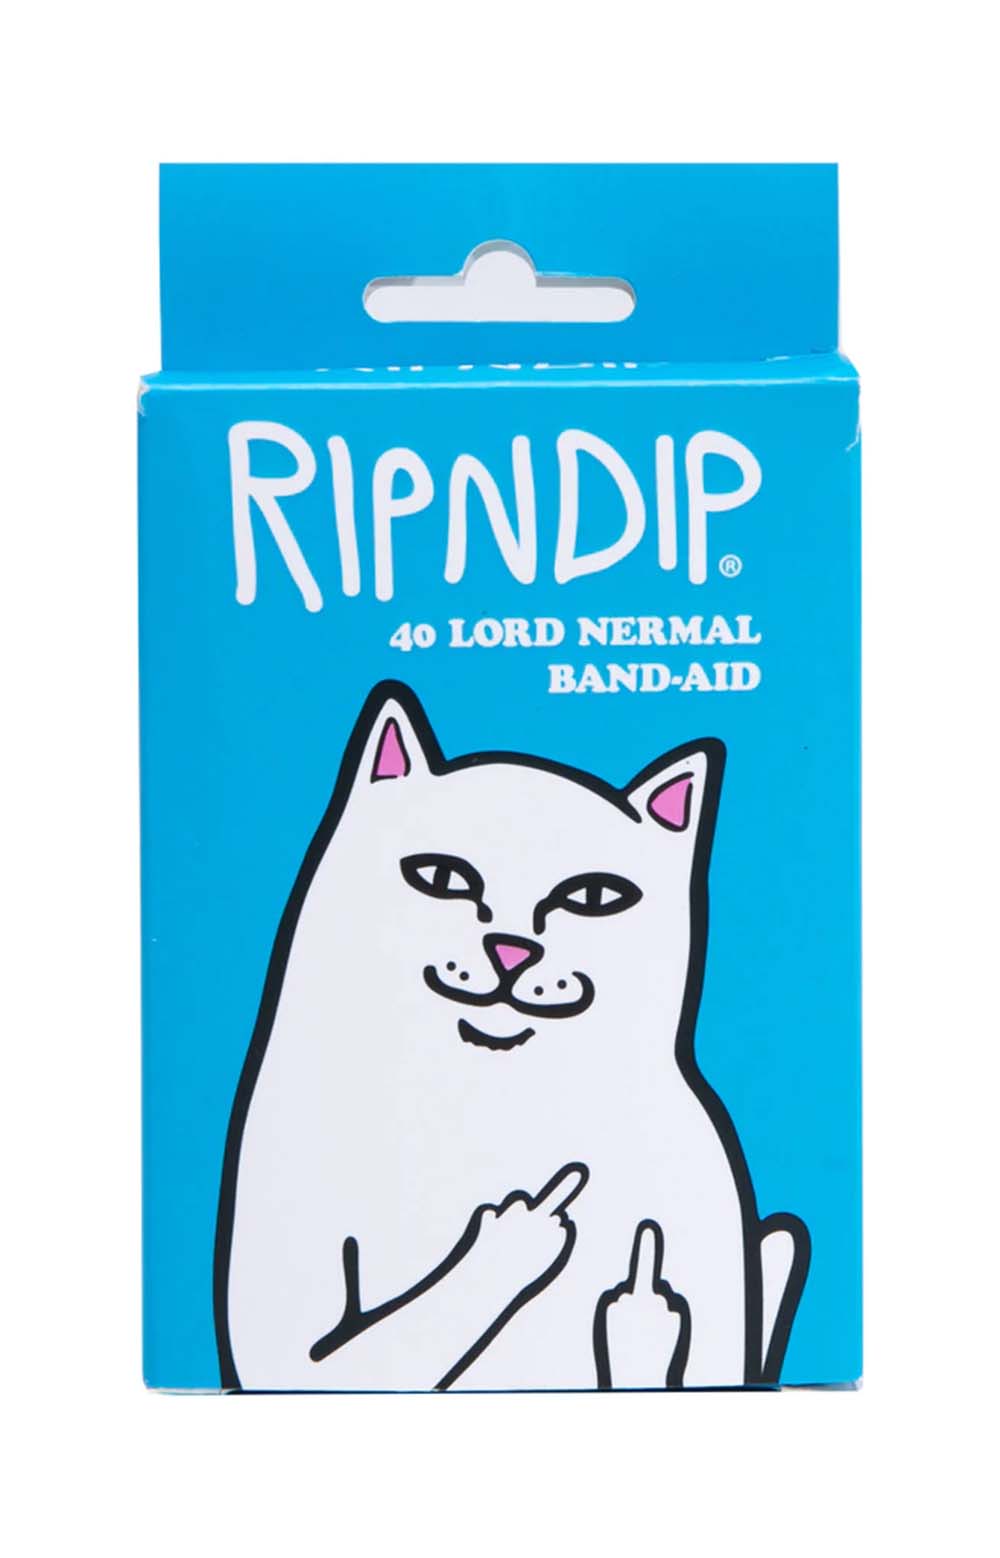 Lord Nermal Band-aid Pack